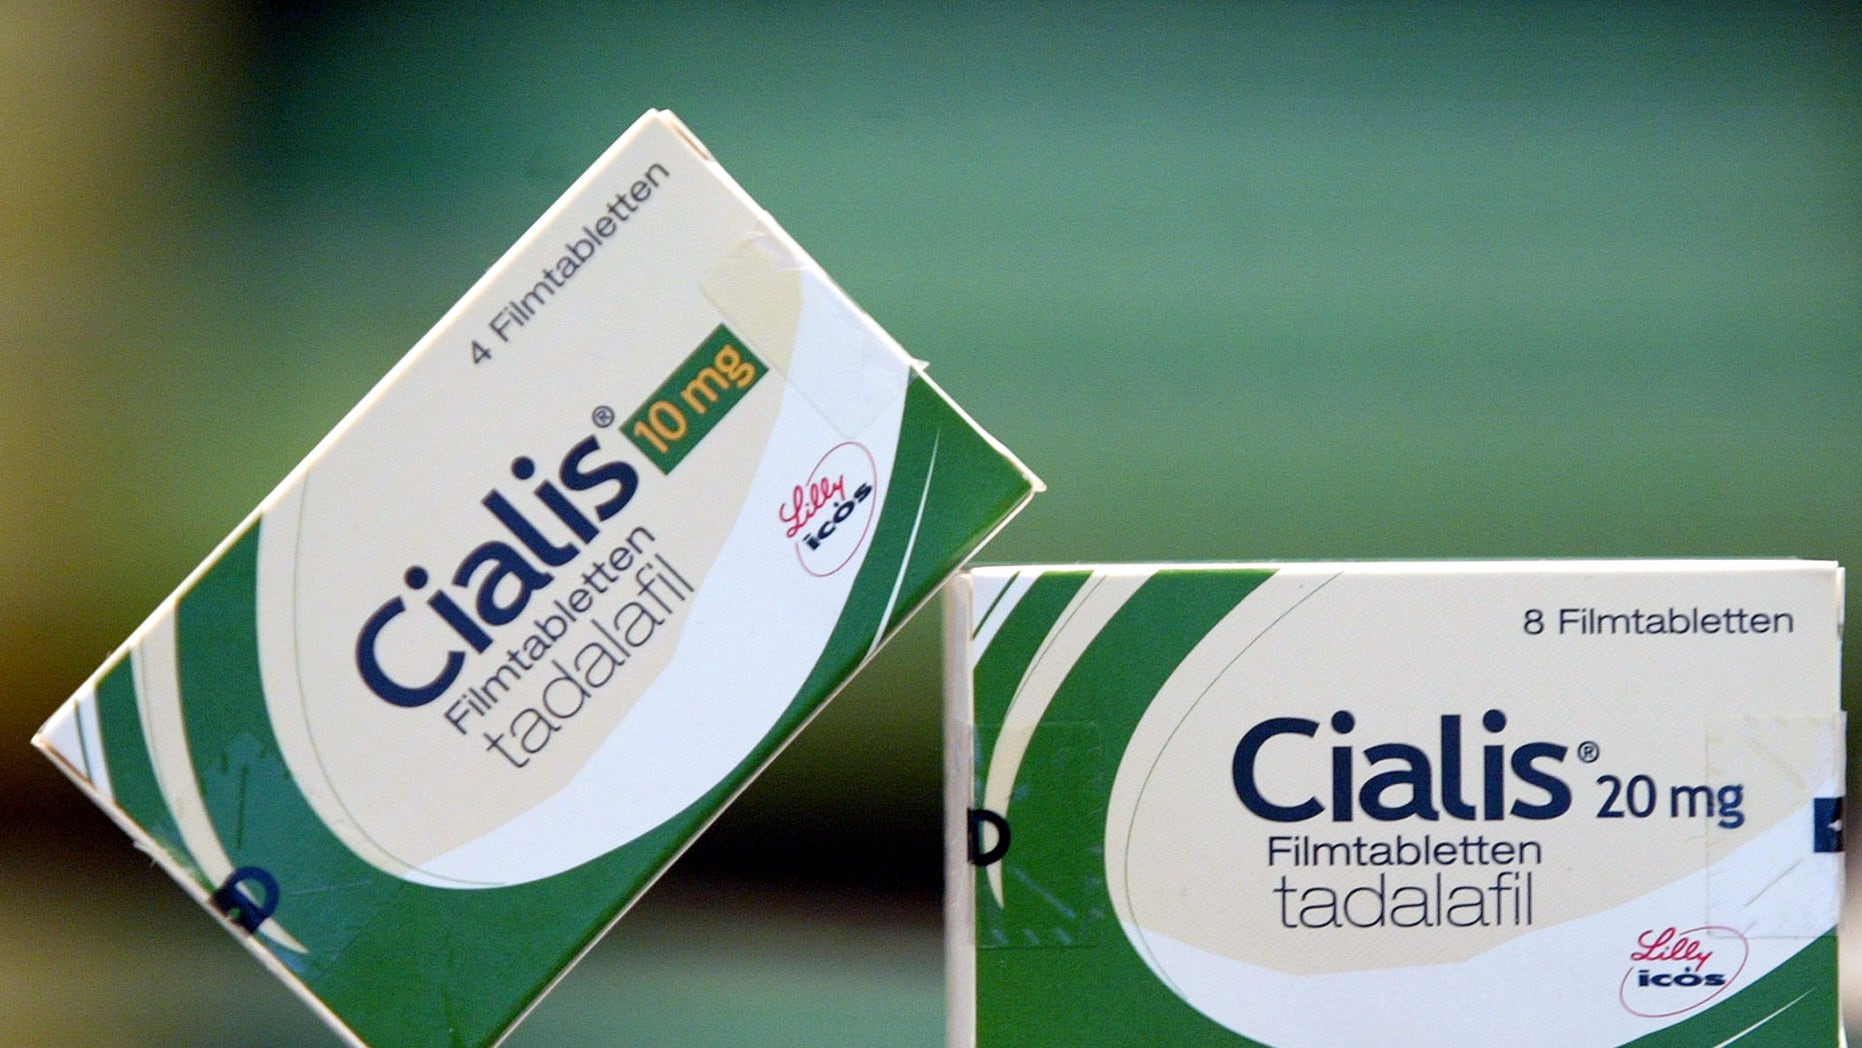 Erectile Dysfunction Drug Cialis Seeking Over The Counter Approval 